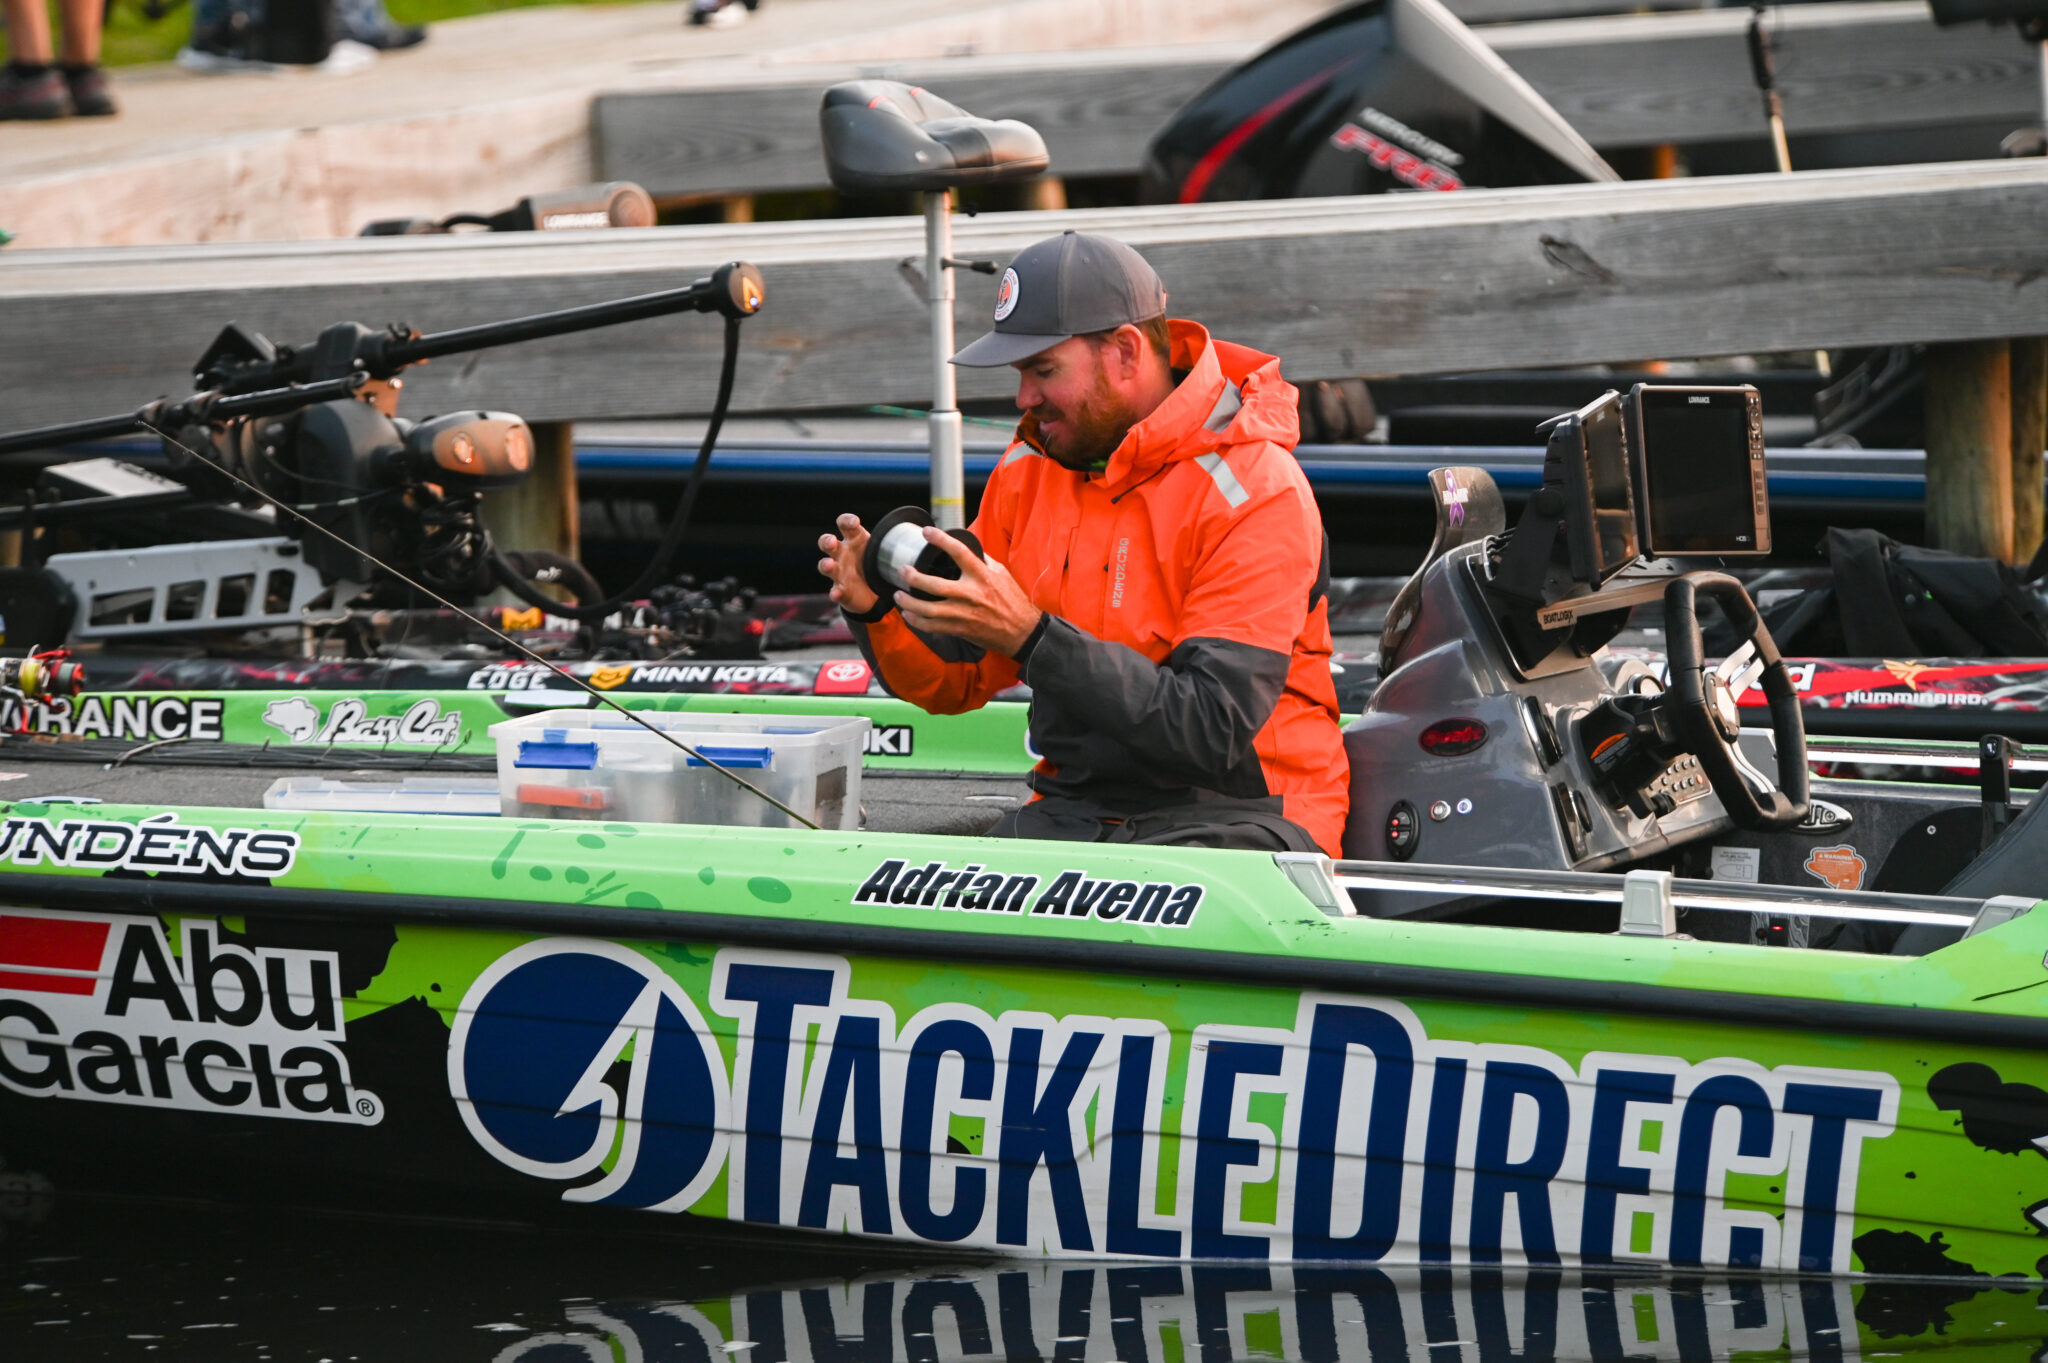 Jared Lintner Dominant in Group B at MLF Bass Pro Tour B&W Trailer Hitches  Stage One Presented by Power-Pole - Major League Fishing